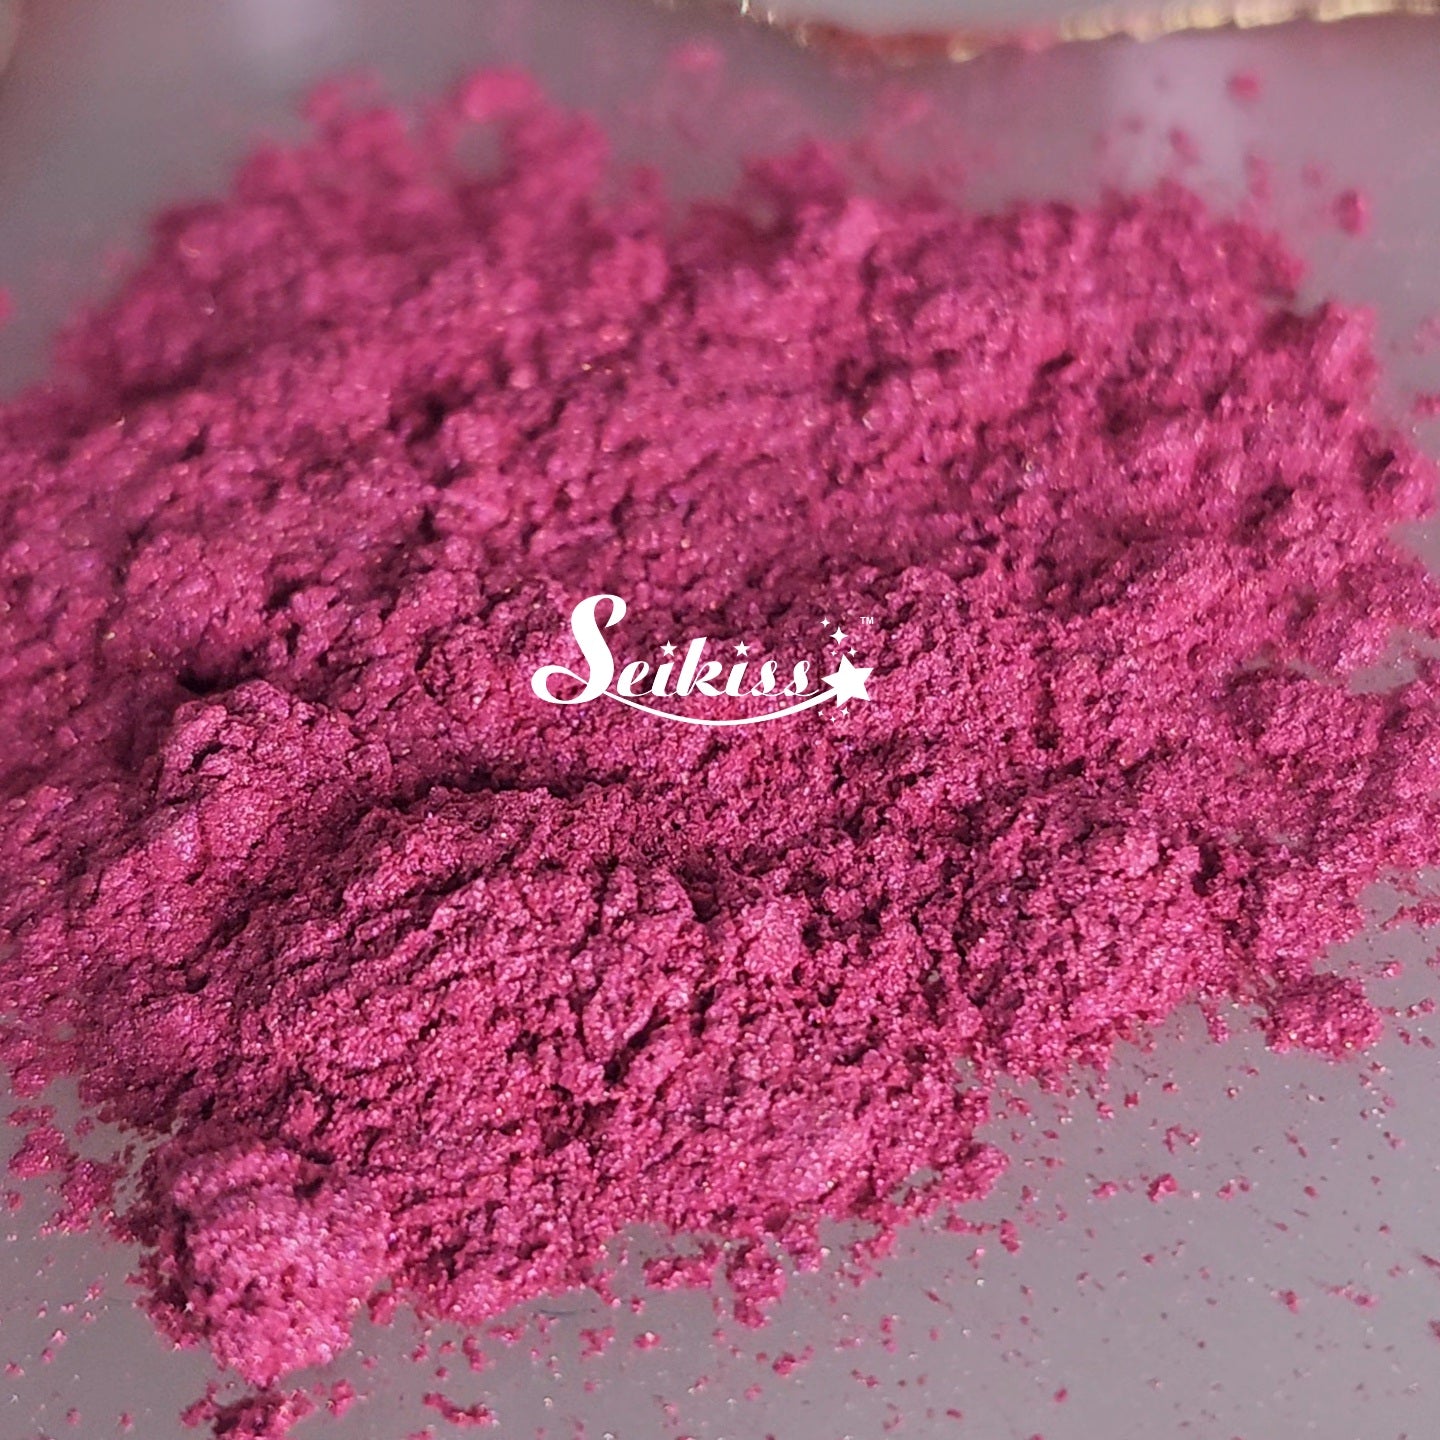 Berry Fuchsia Mica Powder for Resin, Alcohol Ink, Epoxy, Wax Melts - Pink Mica